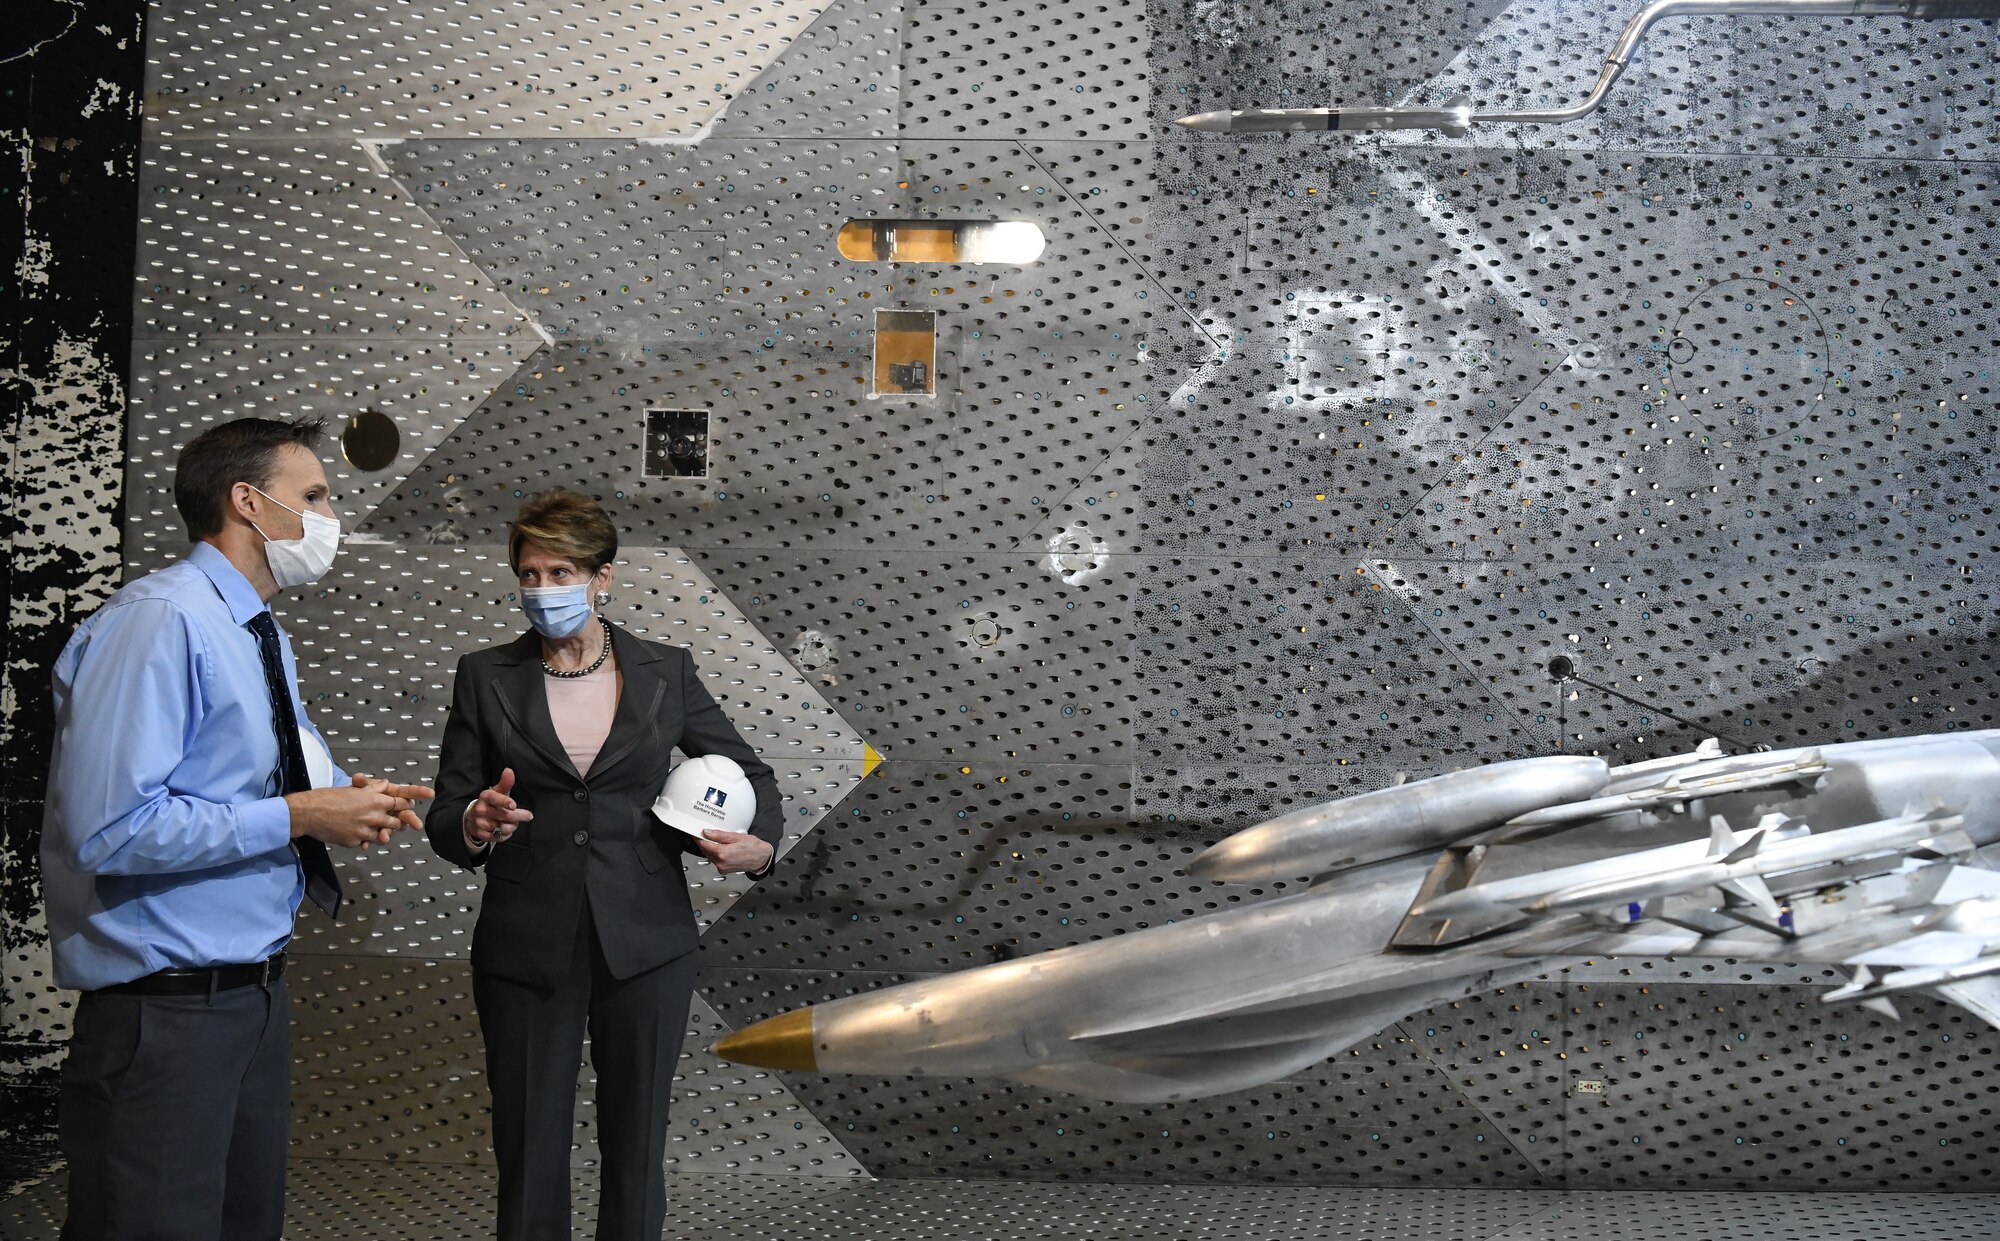 Dr. Rich Roberts, flight commander for store separation, speaks with Secretary of the Air Force Barbara Barrett about a store separation test of a AARGM-ER from an F-18 Super Hornet using models in the Arnold Engineering Development Complex 16-foot Transonic Wind Tunnel at Arnold Air Force Base, Tenn., June 18, 2020. (U.S. Air Force photo by Jill Pickett)